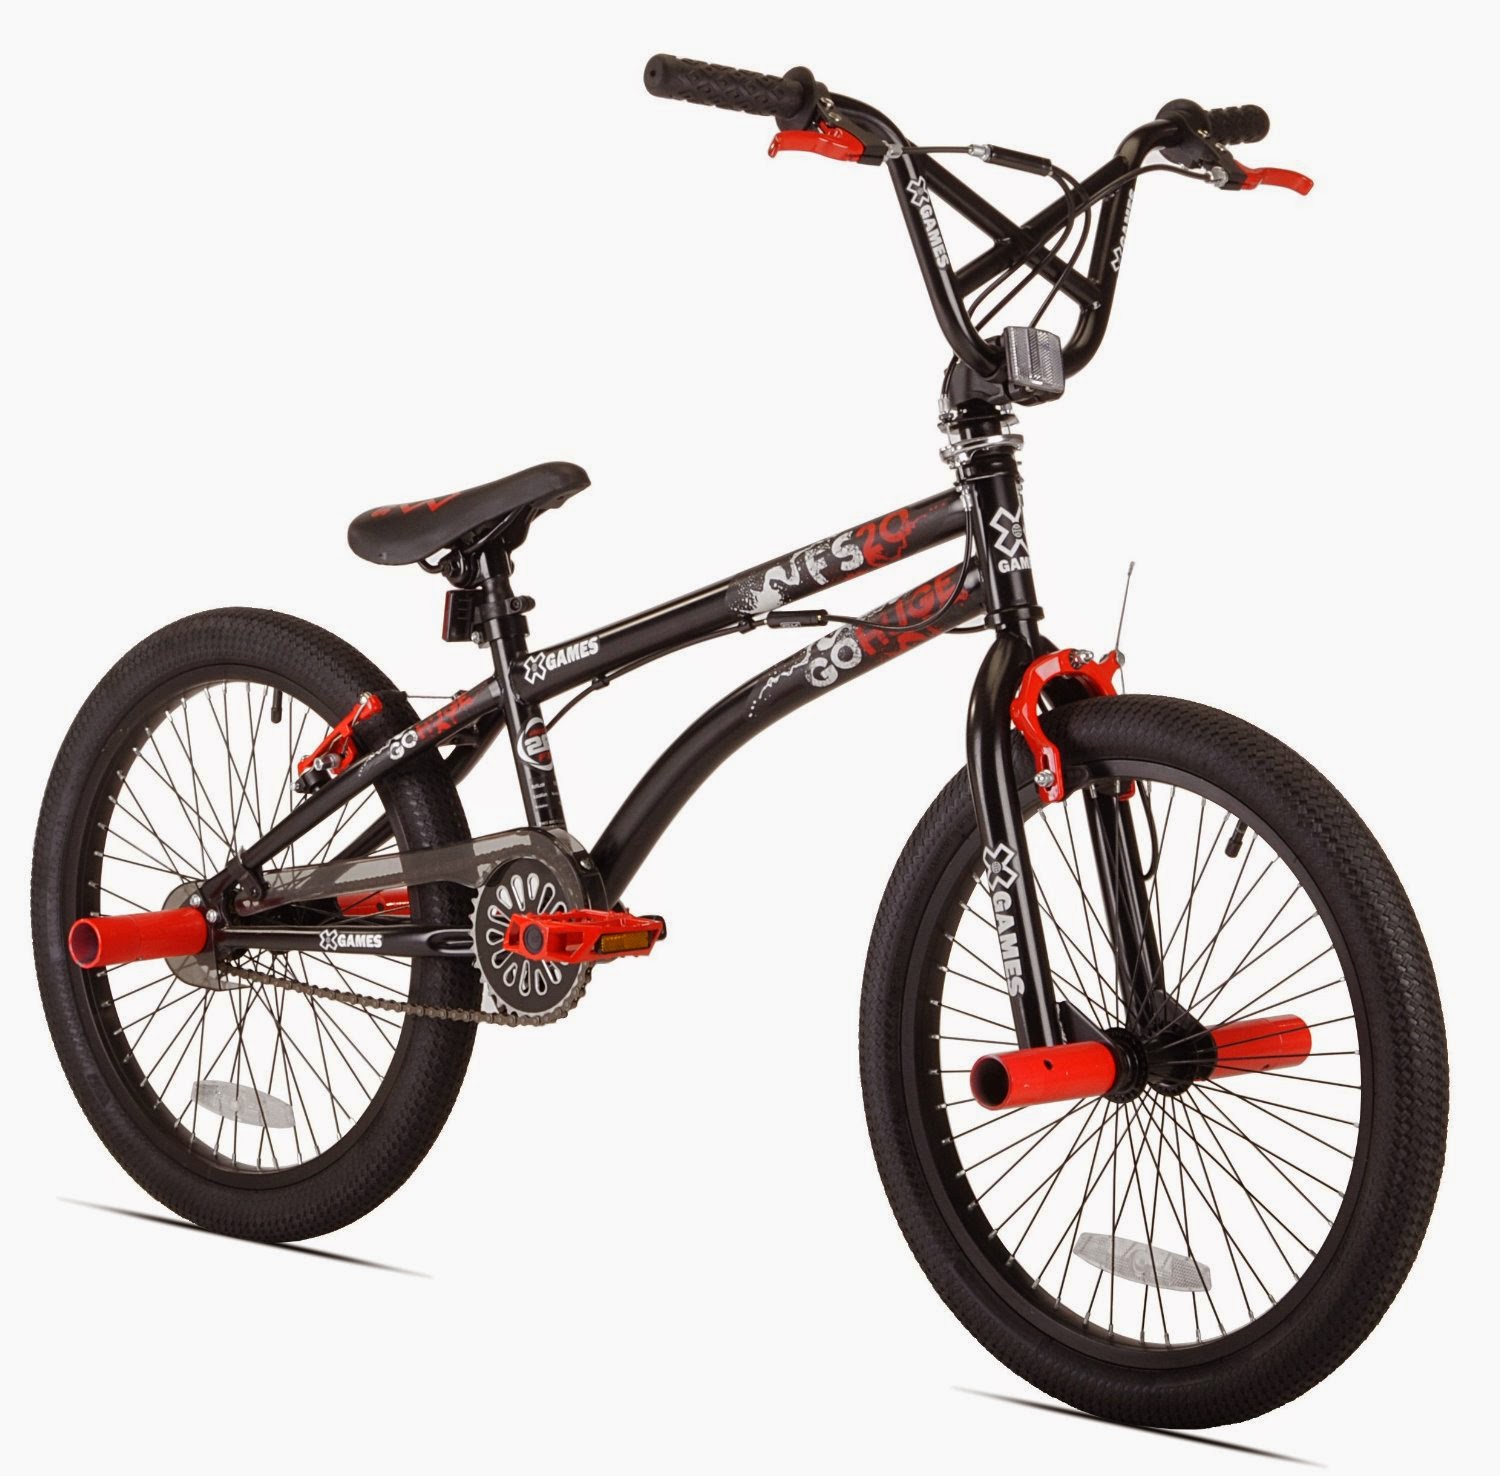 Games FS20 Freestyle BMX Bicycle, review, kids bike for tricks and ...